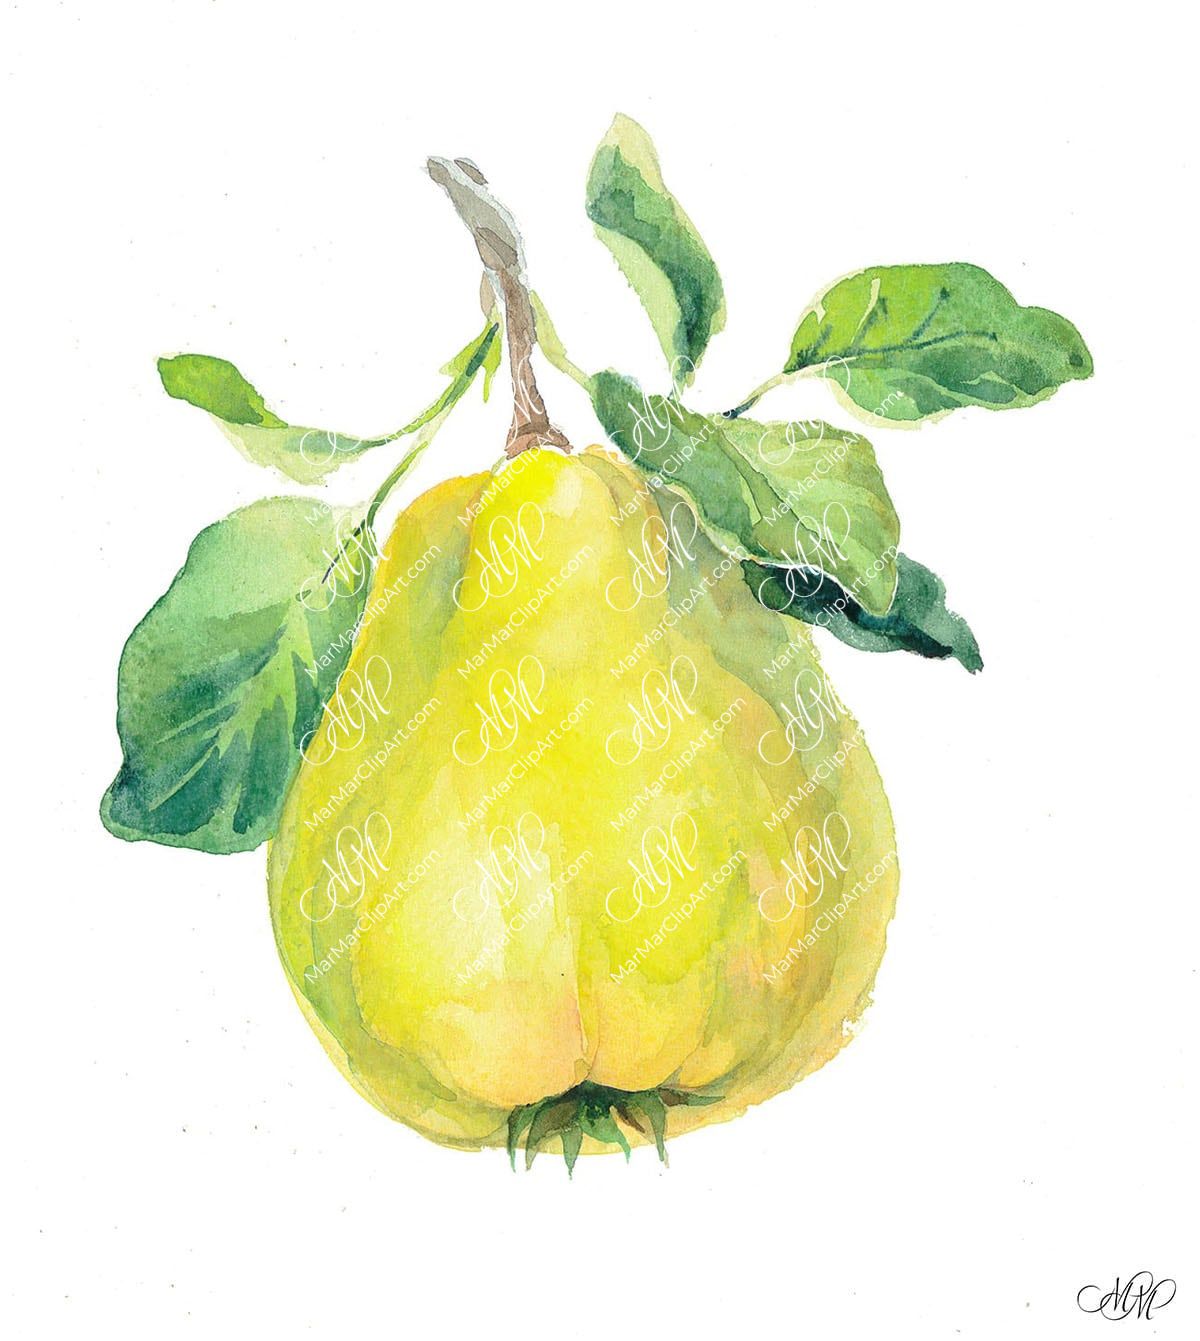 Quince. Isolated on white background. Watercolor. 38x43 cm. cottone2.jpg 9Mb. RGB. 300 px. Instant download.